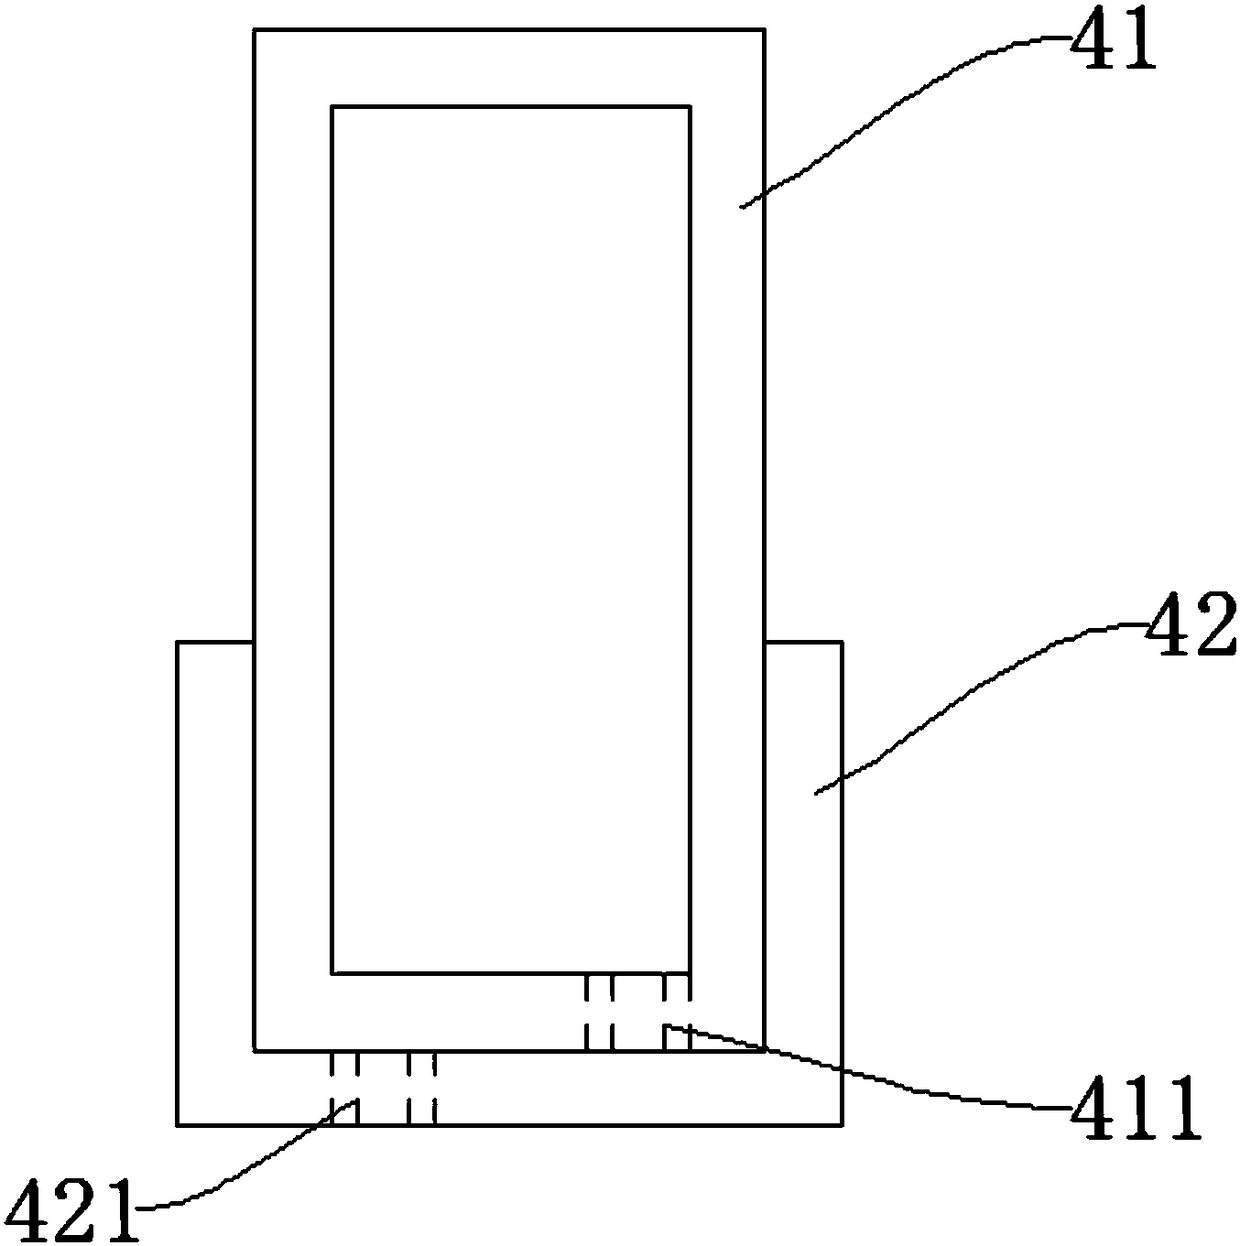 Entrance-exit control device for accurately realizing co-management of high-degree-confidentiality area by multiple persons